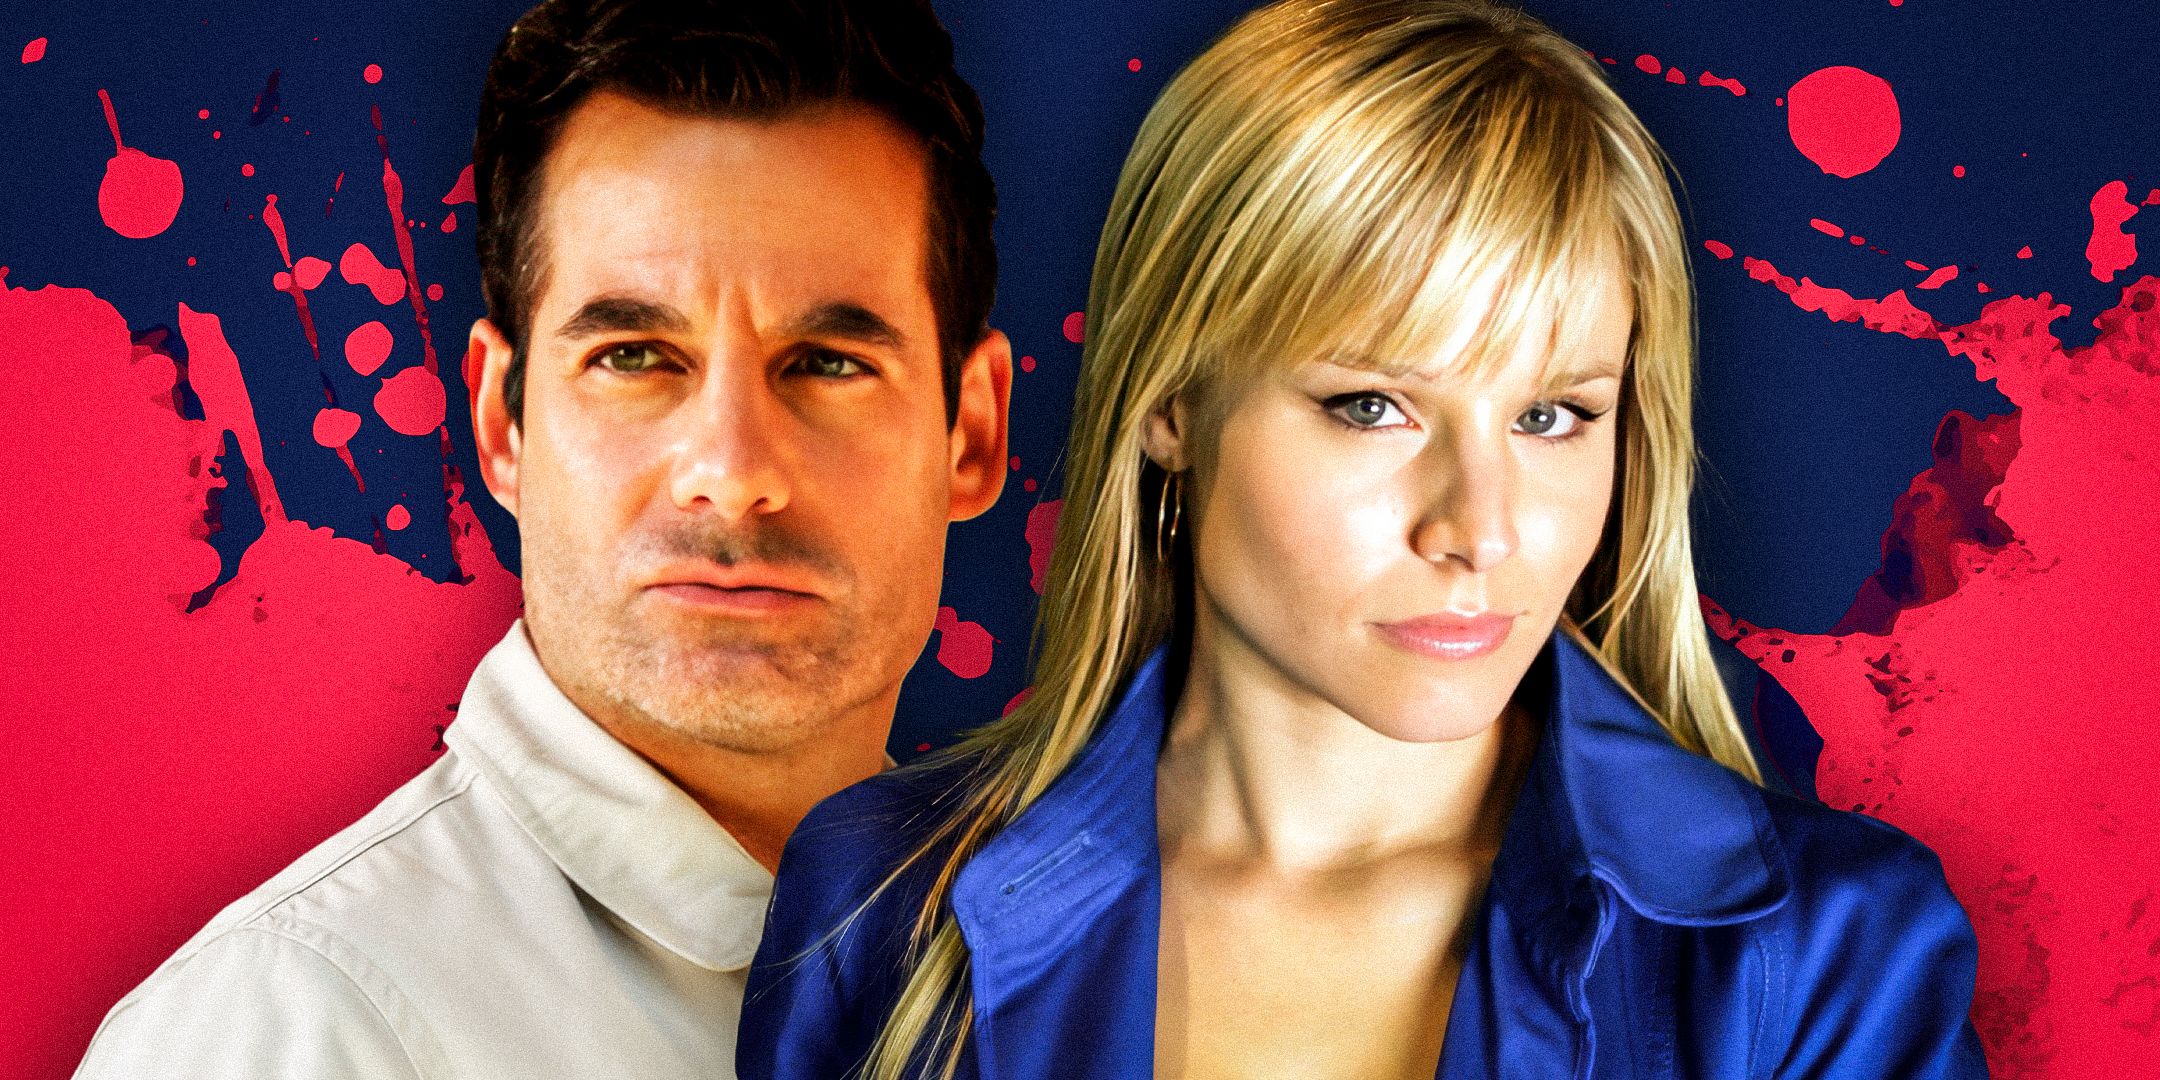 Adrian-Pasdar-as--Nathan-Petrelli-and-Kristen-Bell-as-Elle-Bishop-from-Heroes